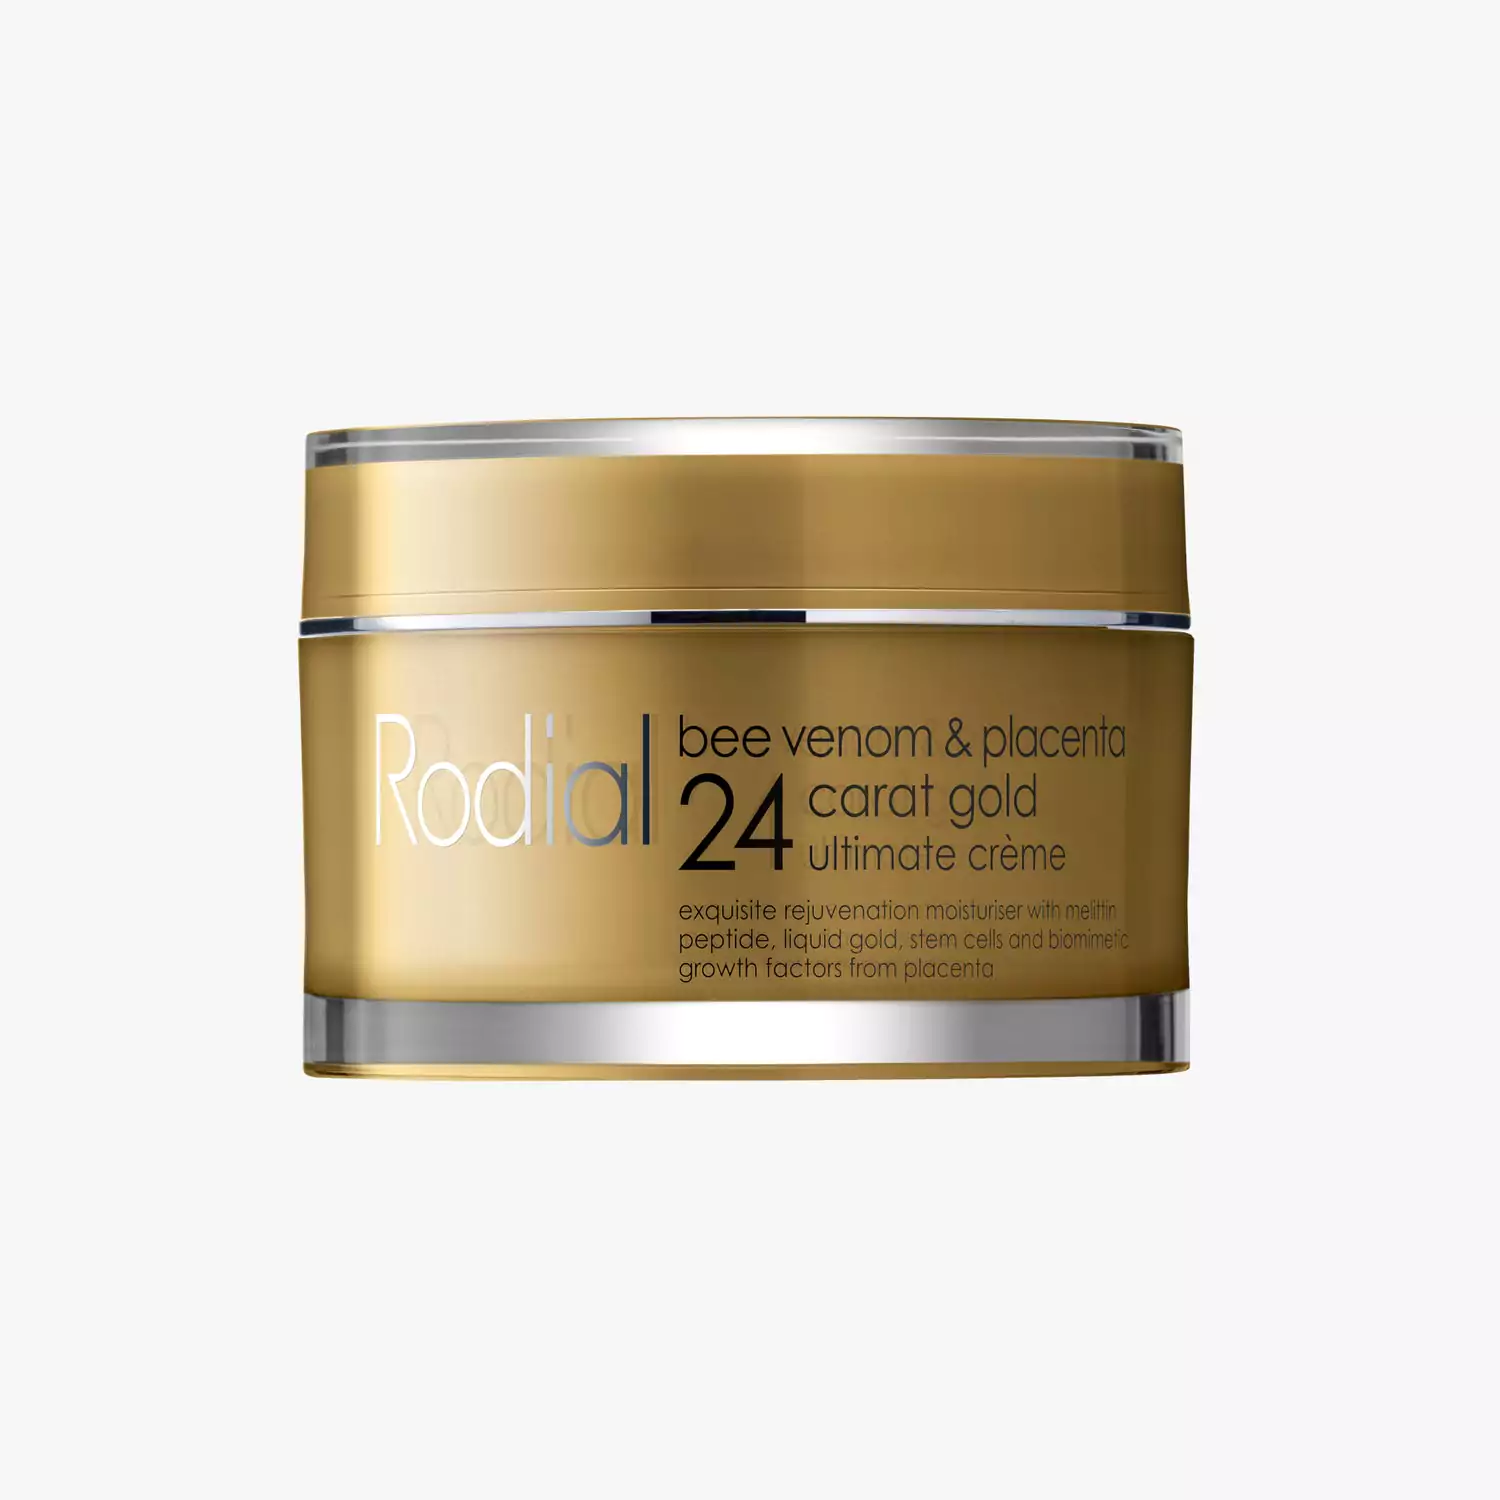 Rodial Bee venom and placenta 24 carat gold ultimate crème Discounts and Cashback